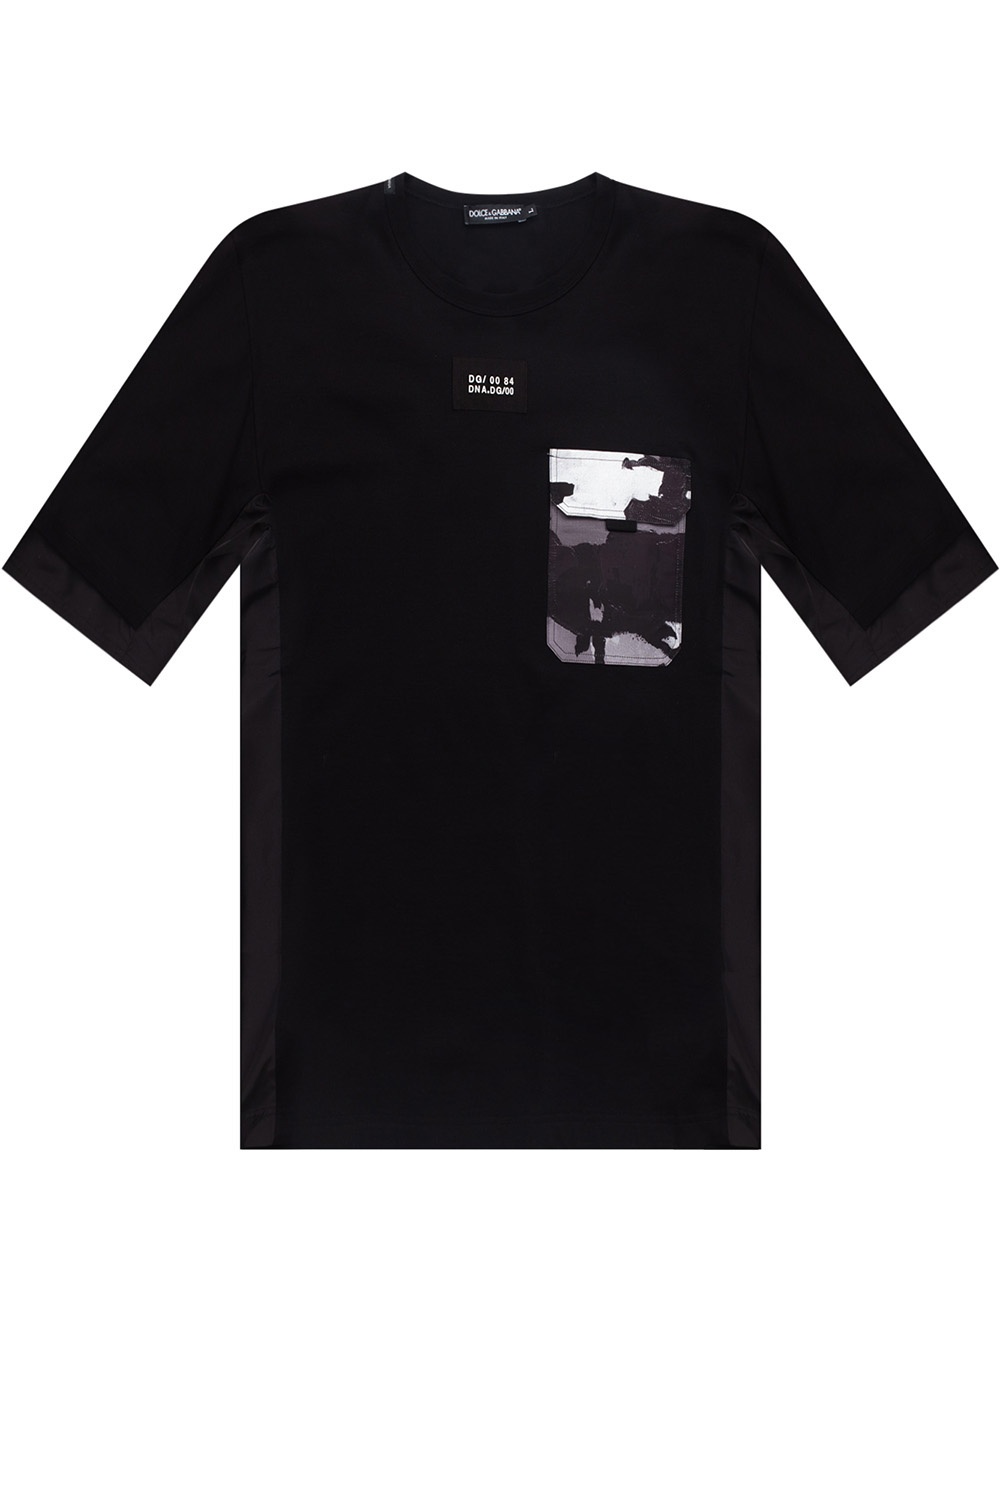 Dolce & Gabbana T-shirt with chest pocket